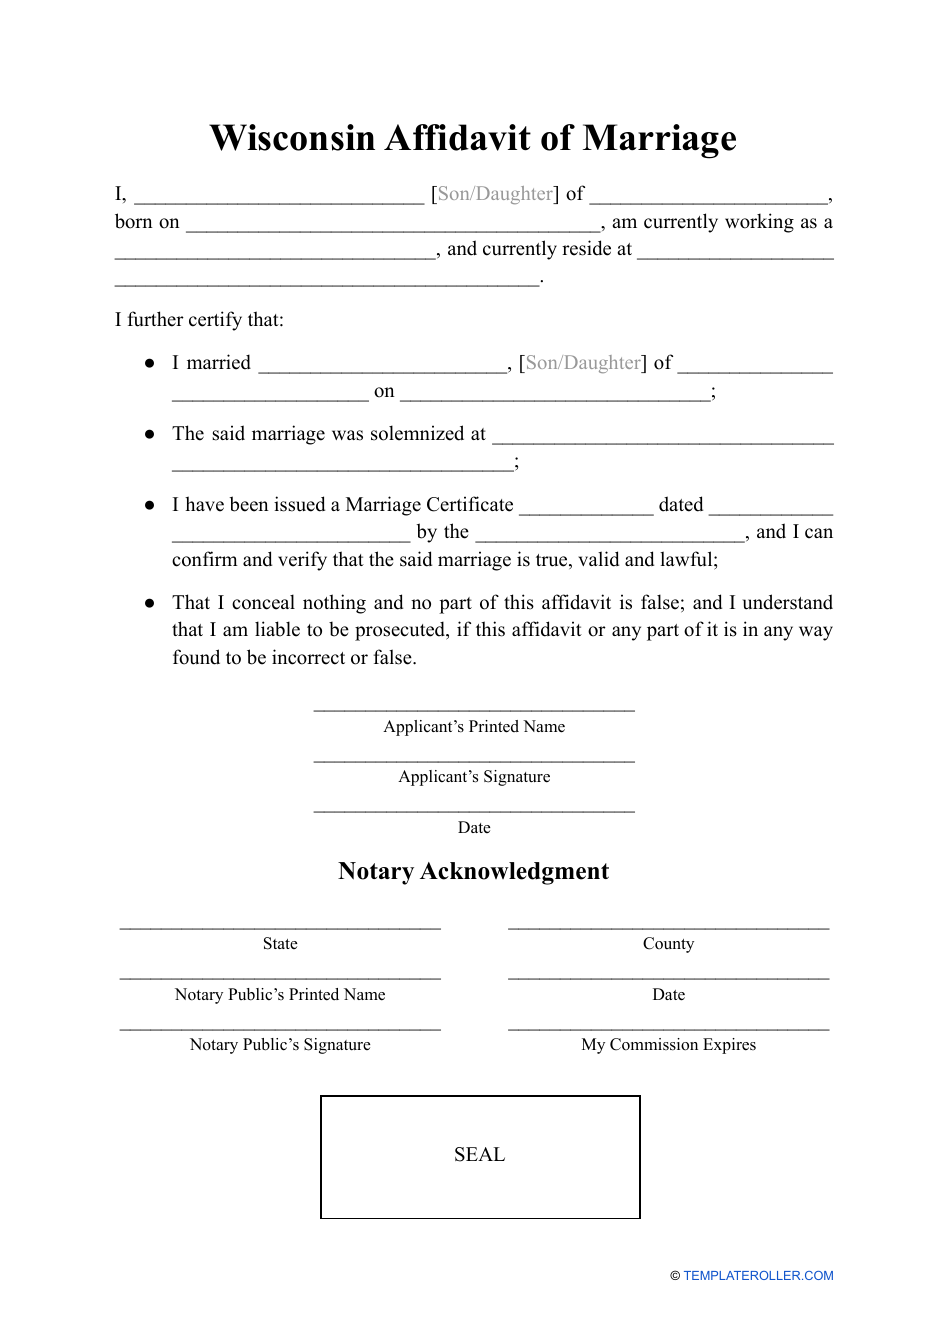 Affidavit of Marriage - Wisconsin, Page 1